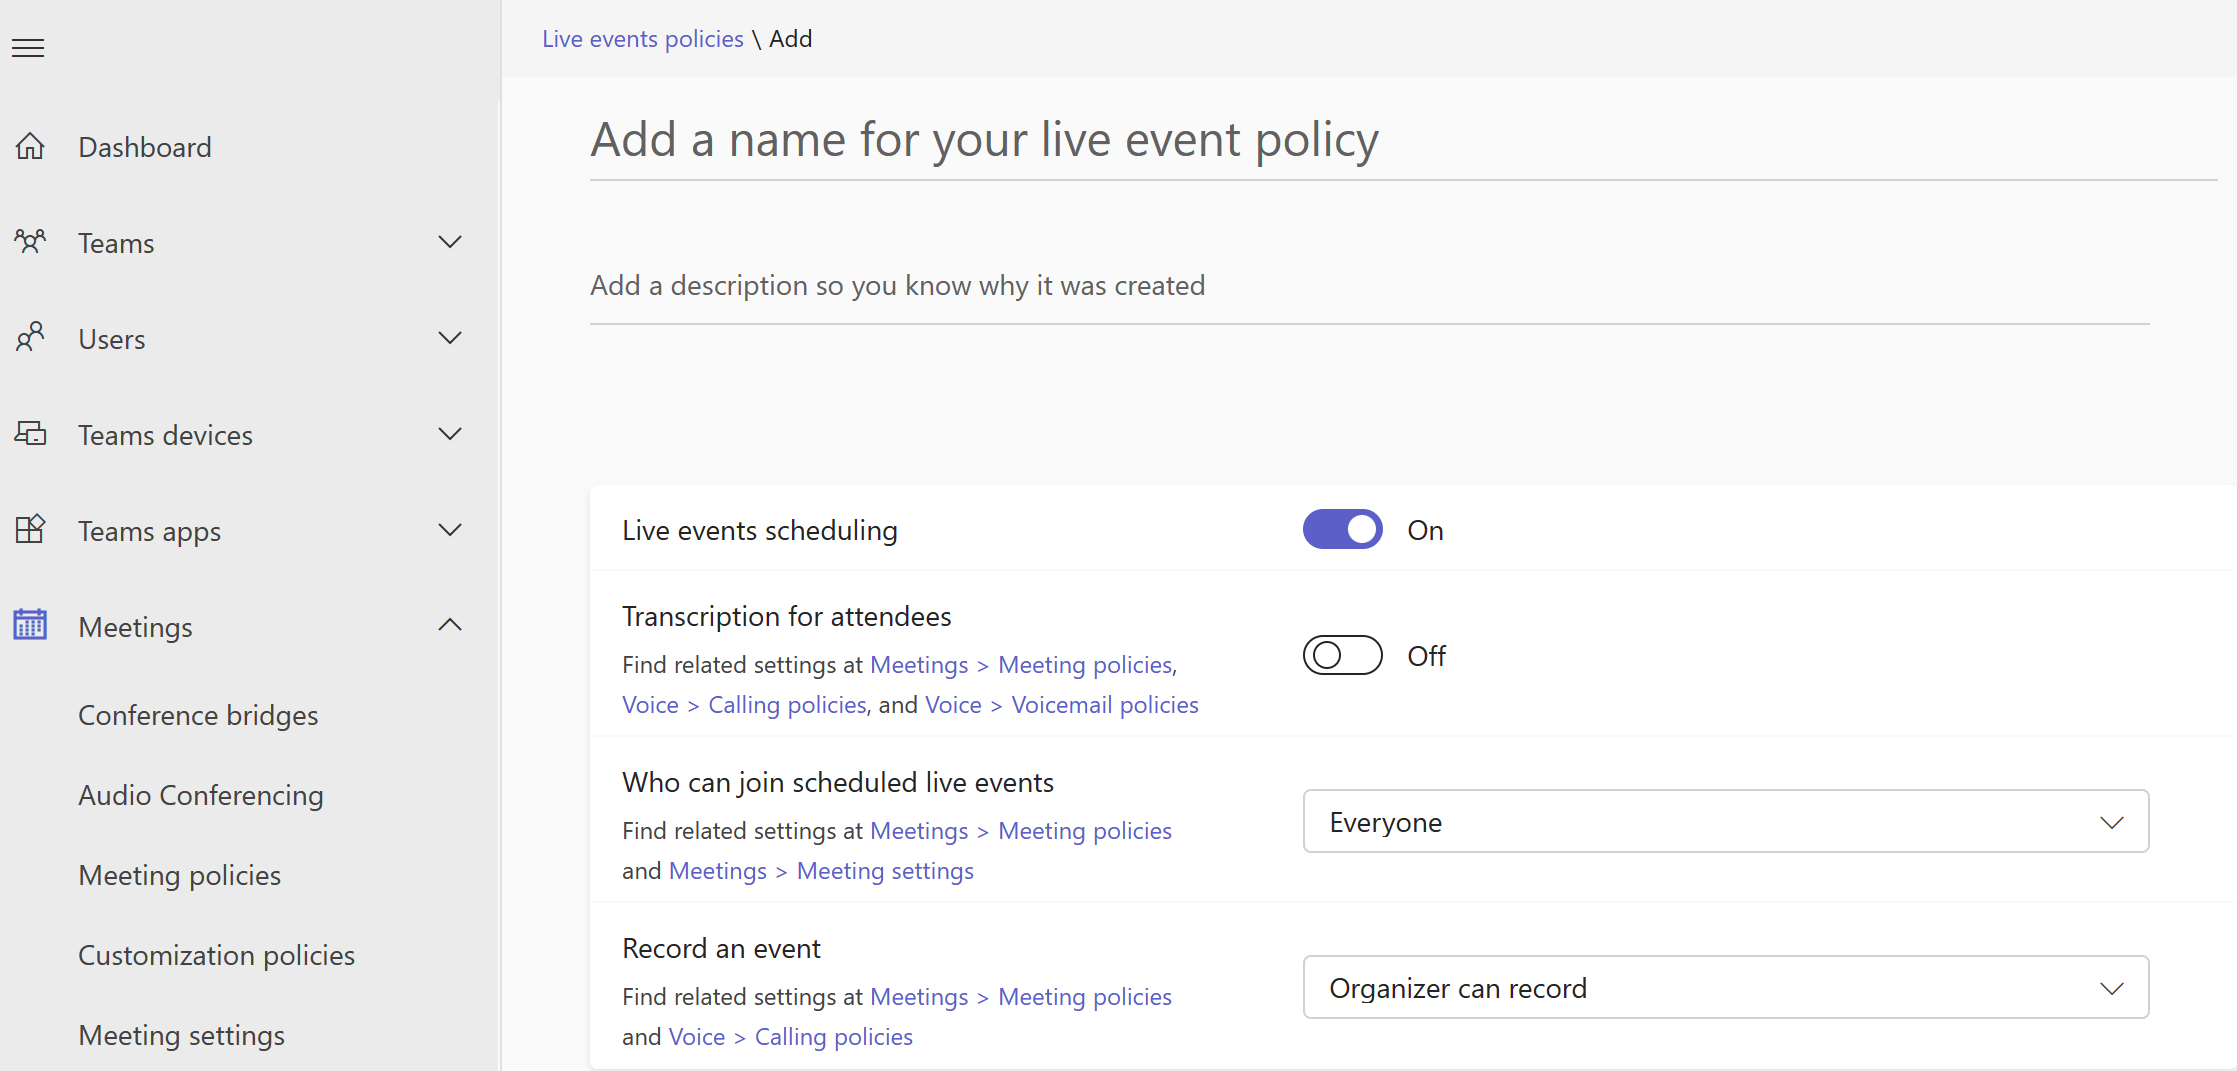 Screen shot of live events policy settings in the Microsoft Teams admin center.